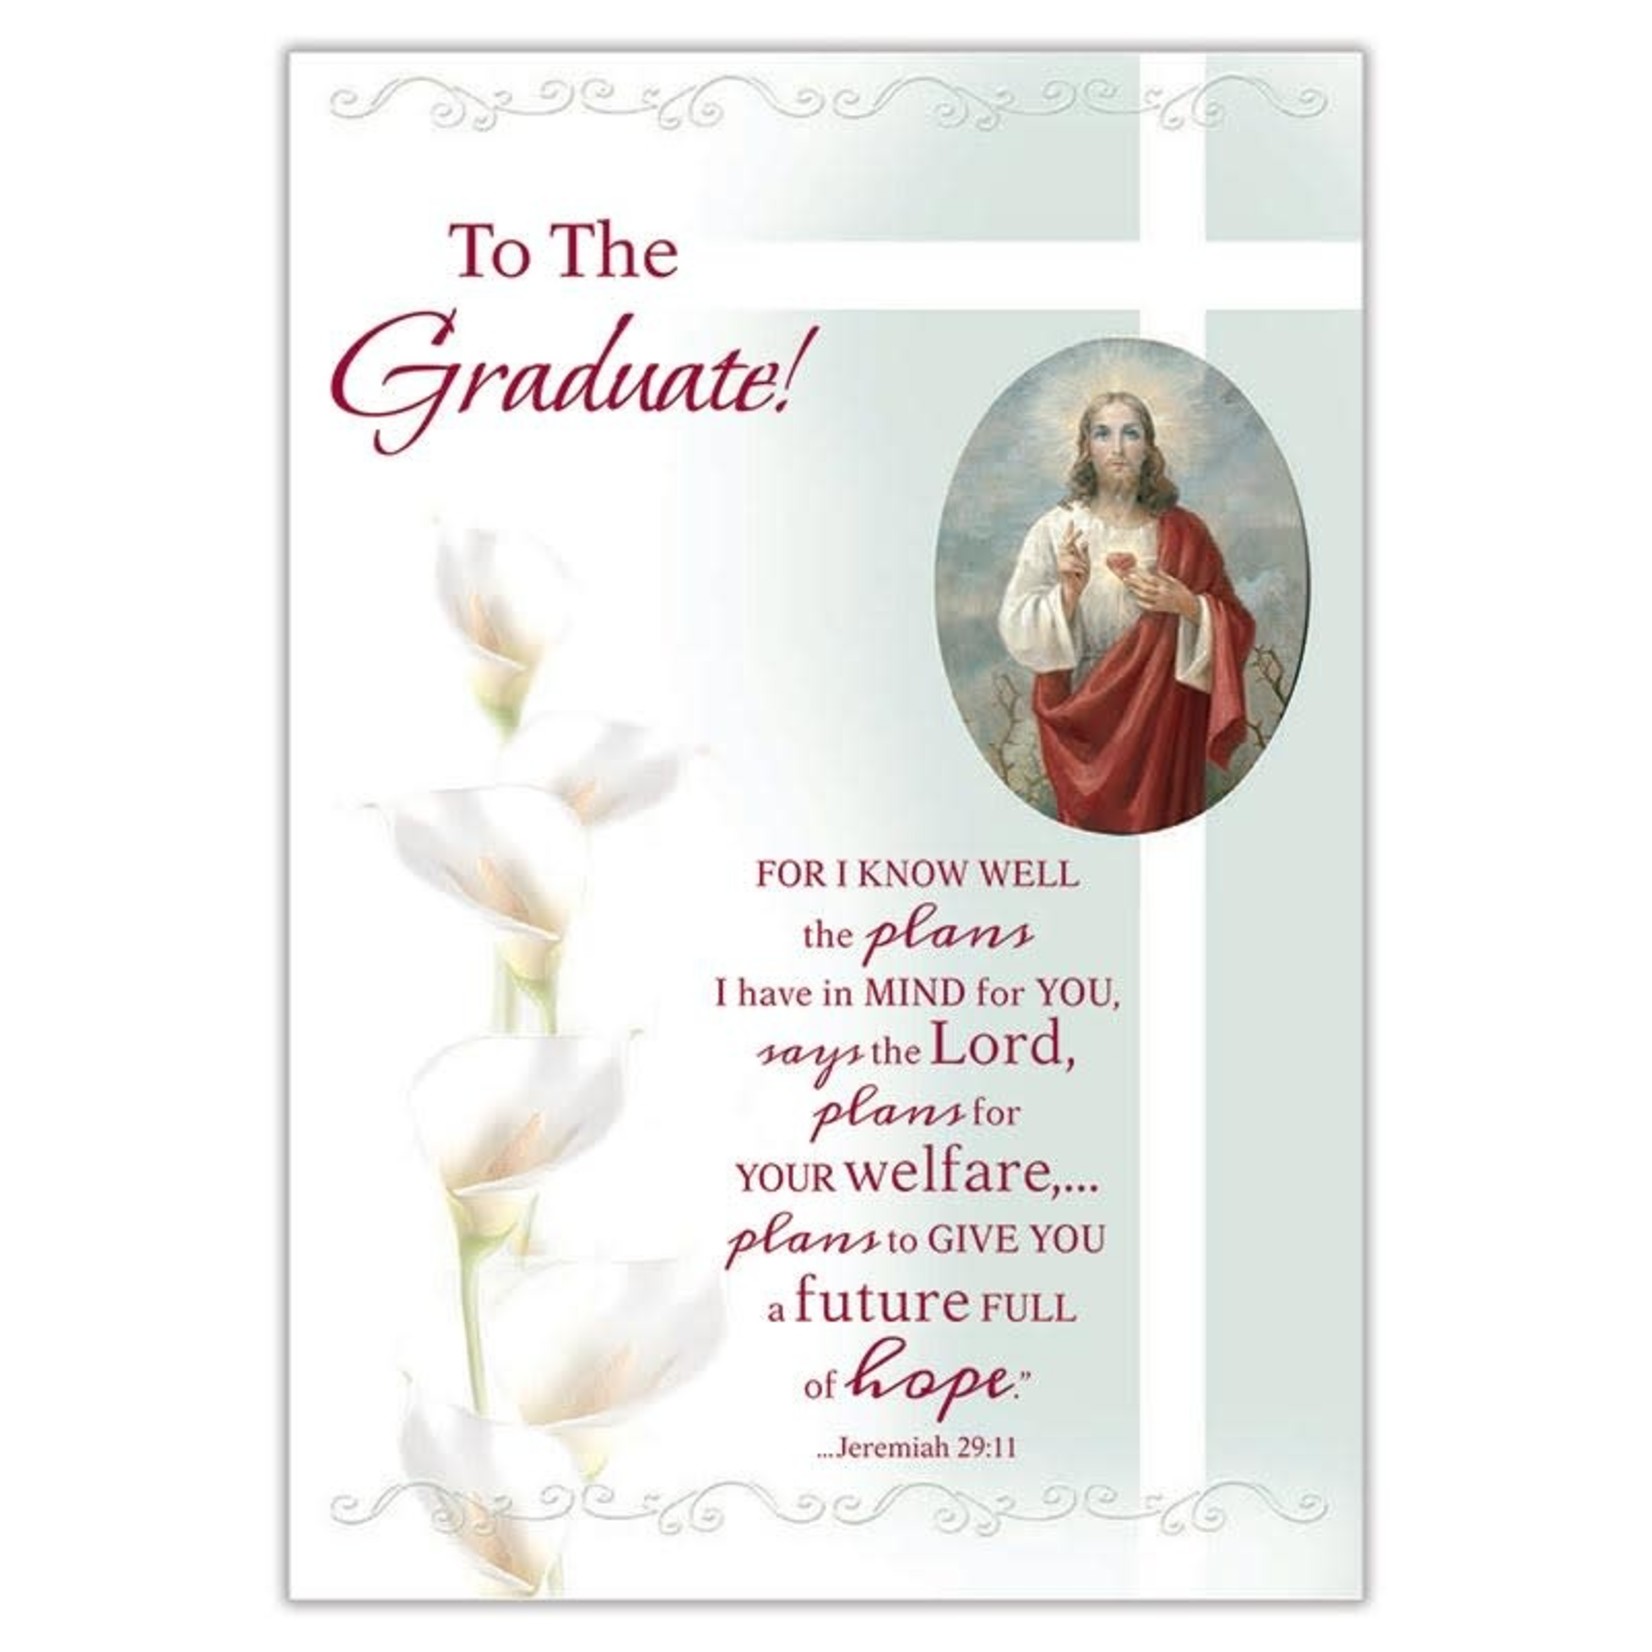 Greeting Card- To the Graduate!